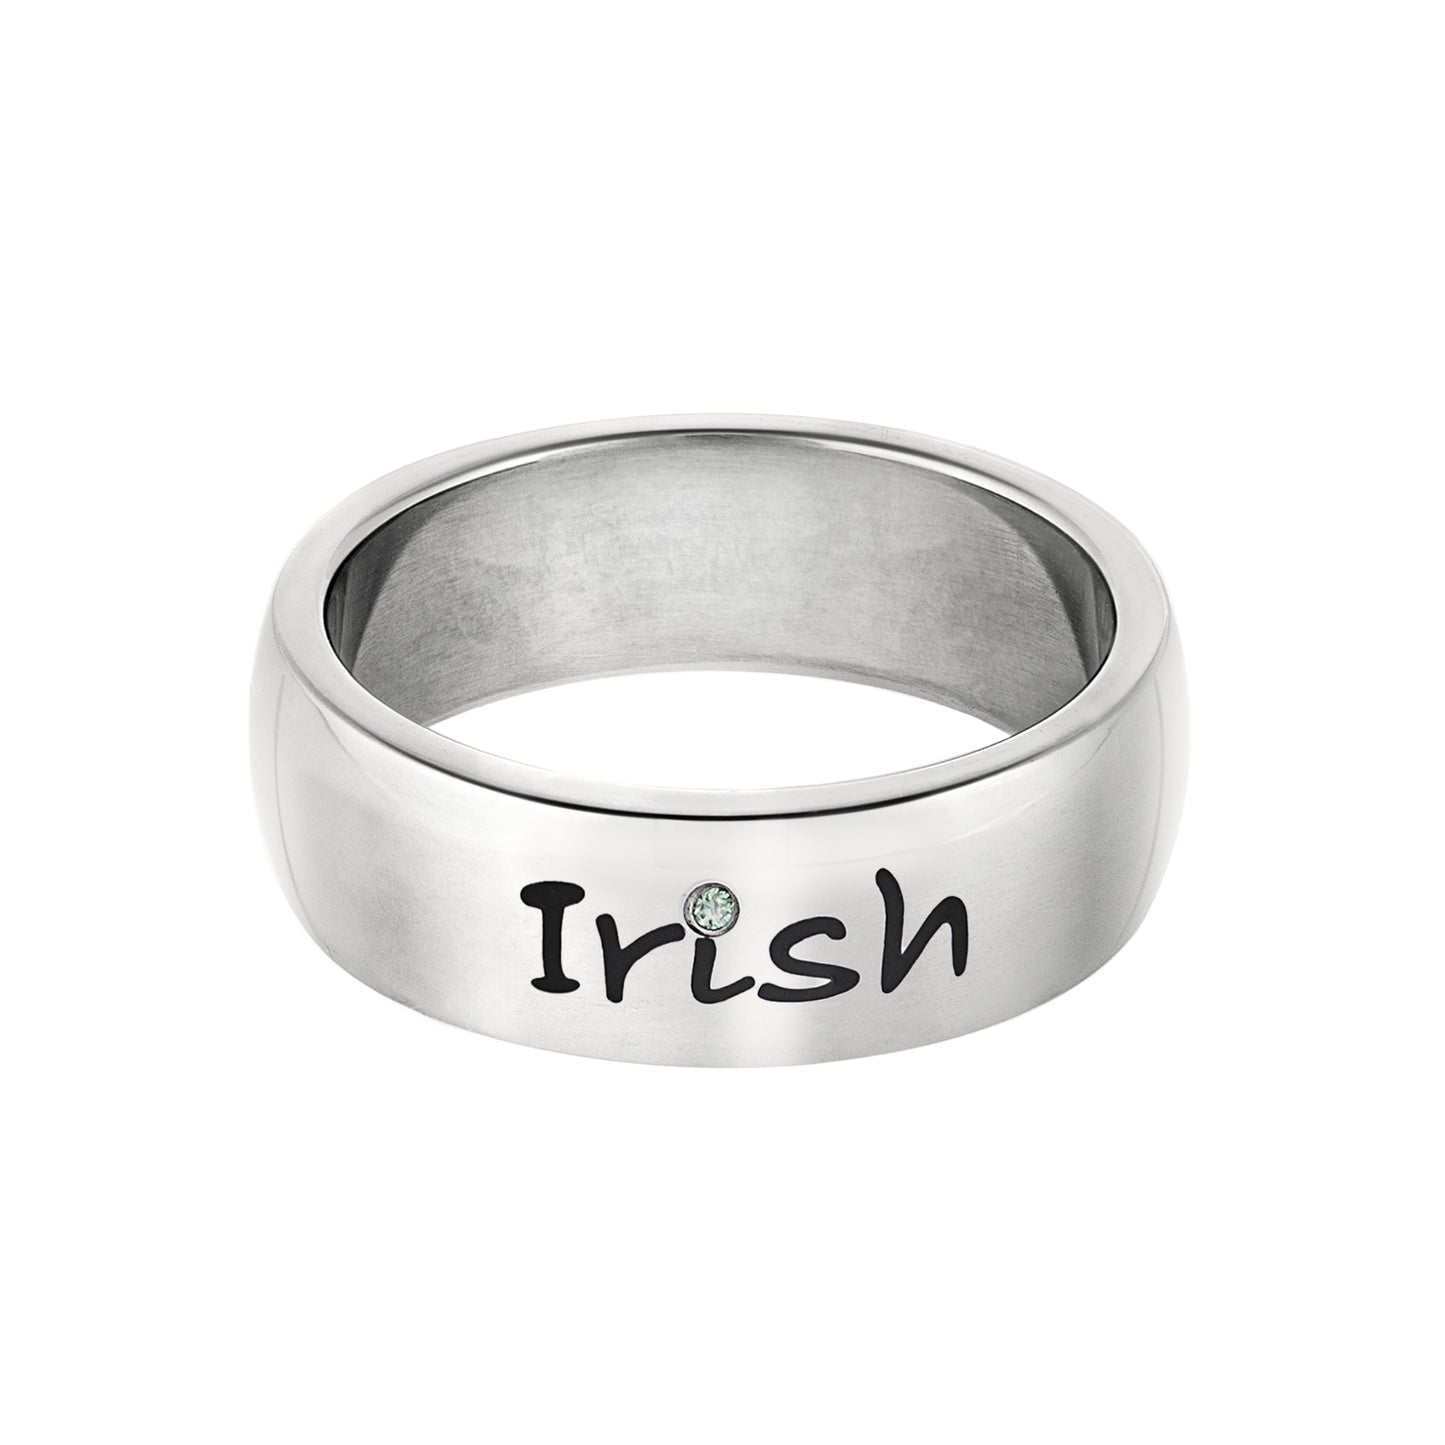 Stainless Steel Irish Celtic Knot Ring with Cubic Zirconia